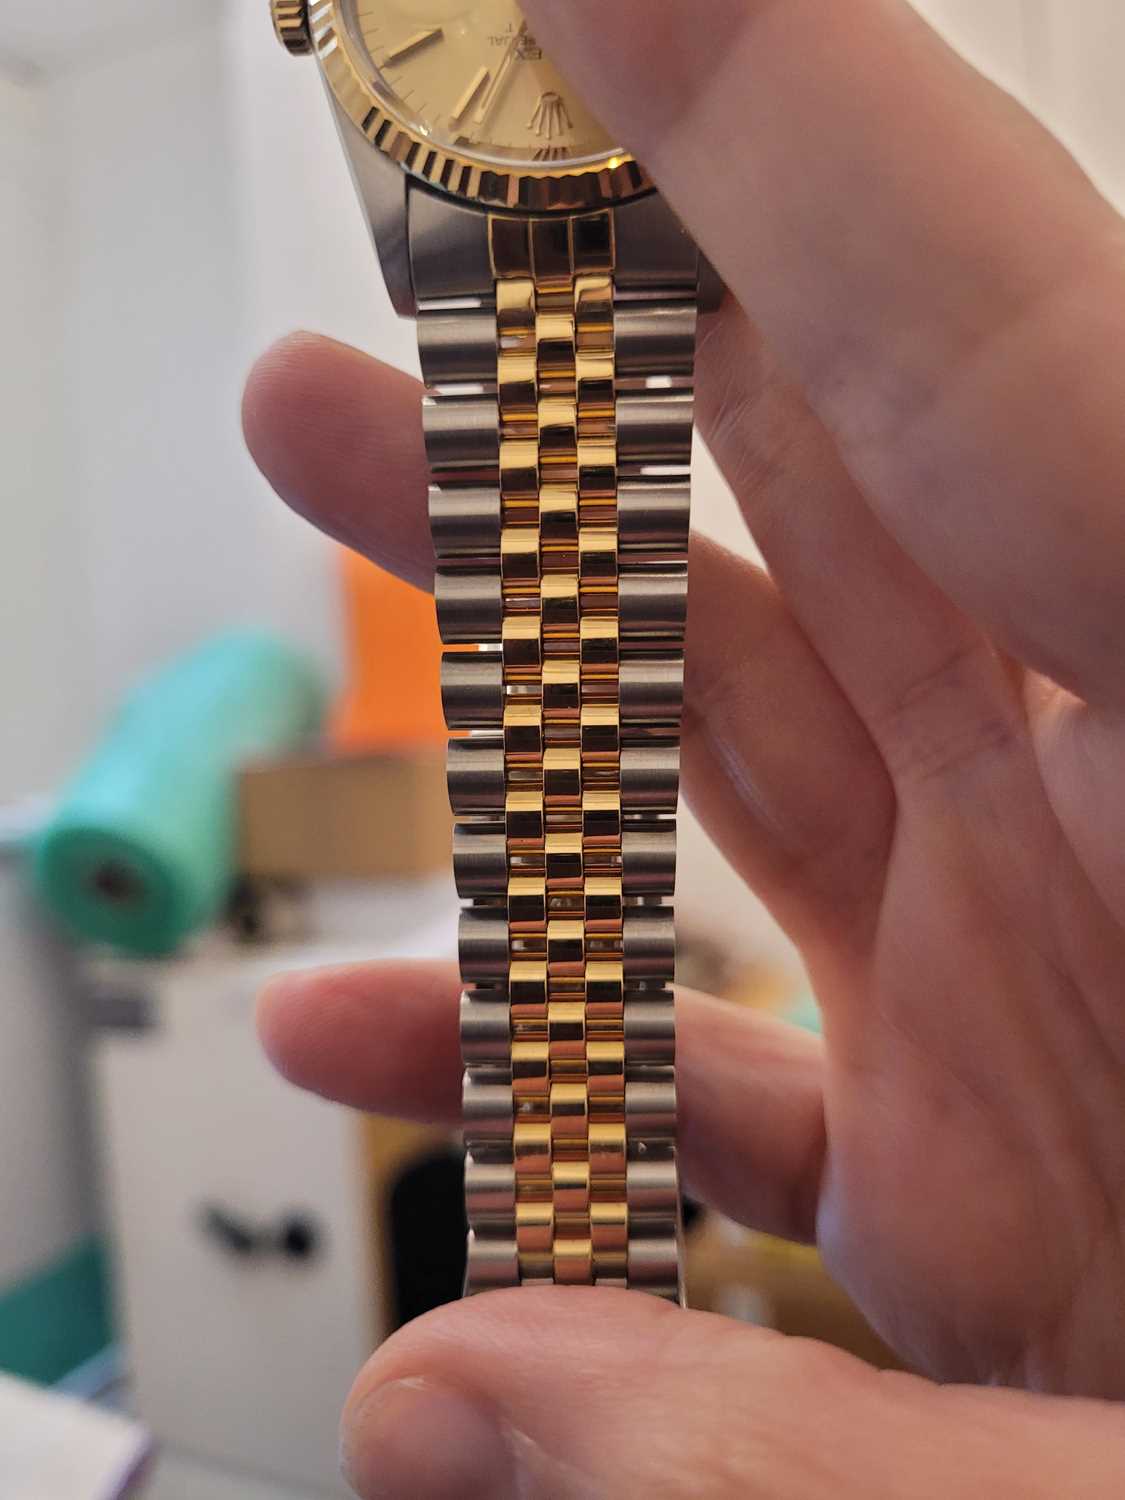 A Gentlemen's stainless steel and 18ct gold Rolex Datejust bracelet watch, c.1973, - Image 6 of 7